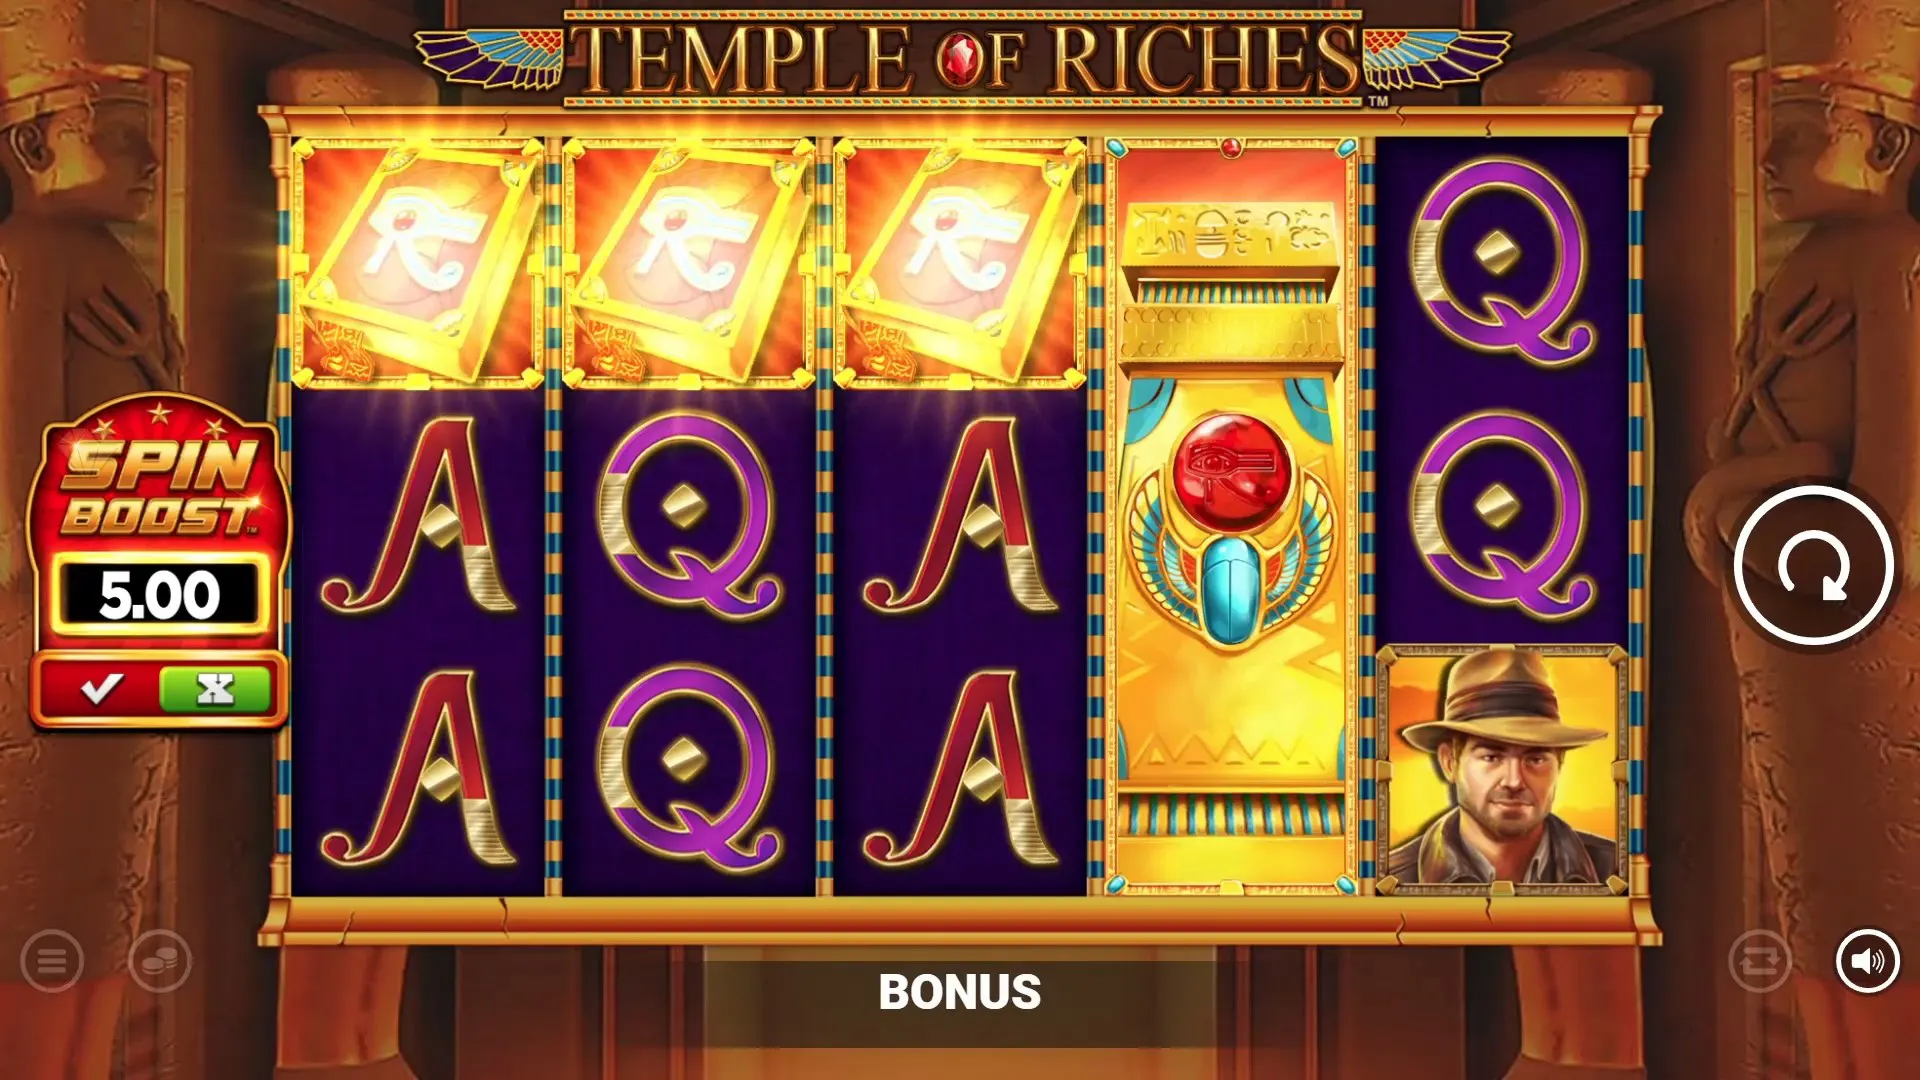 Temple of Riches Spin Boost demonstração